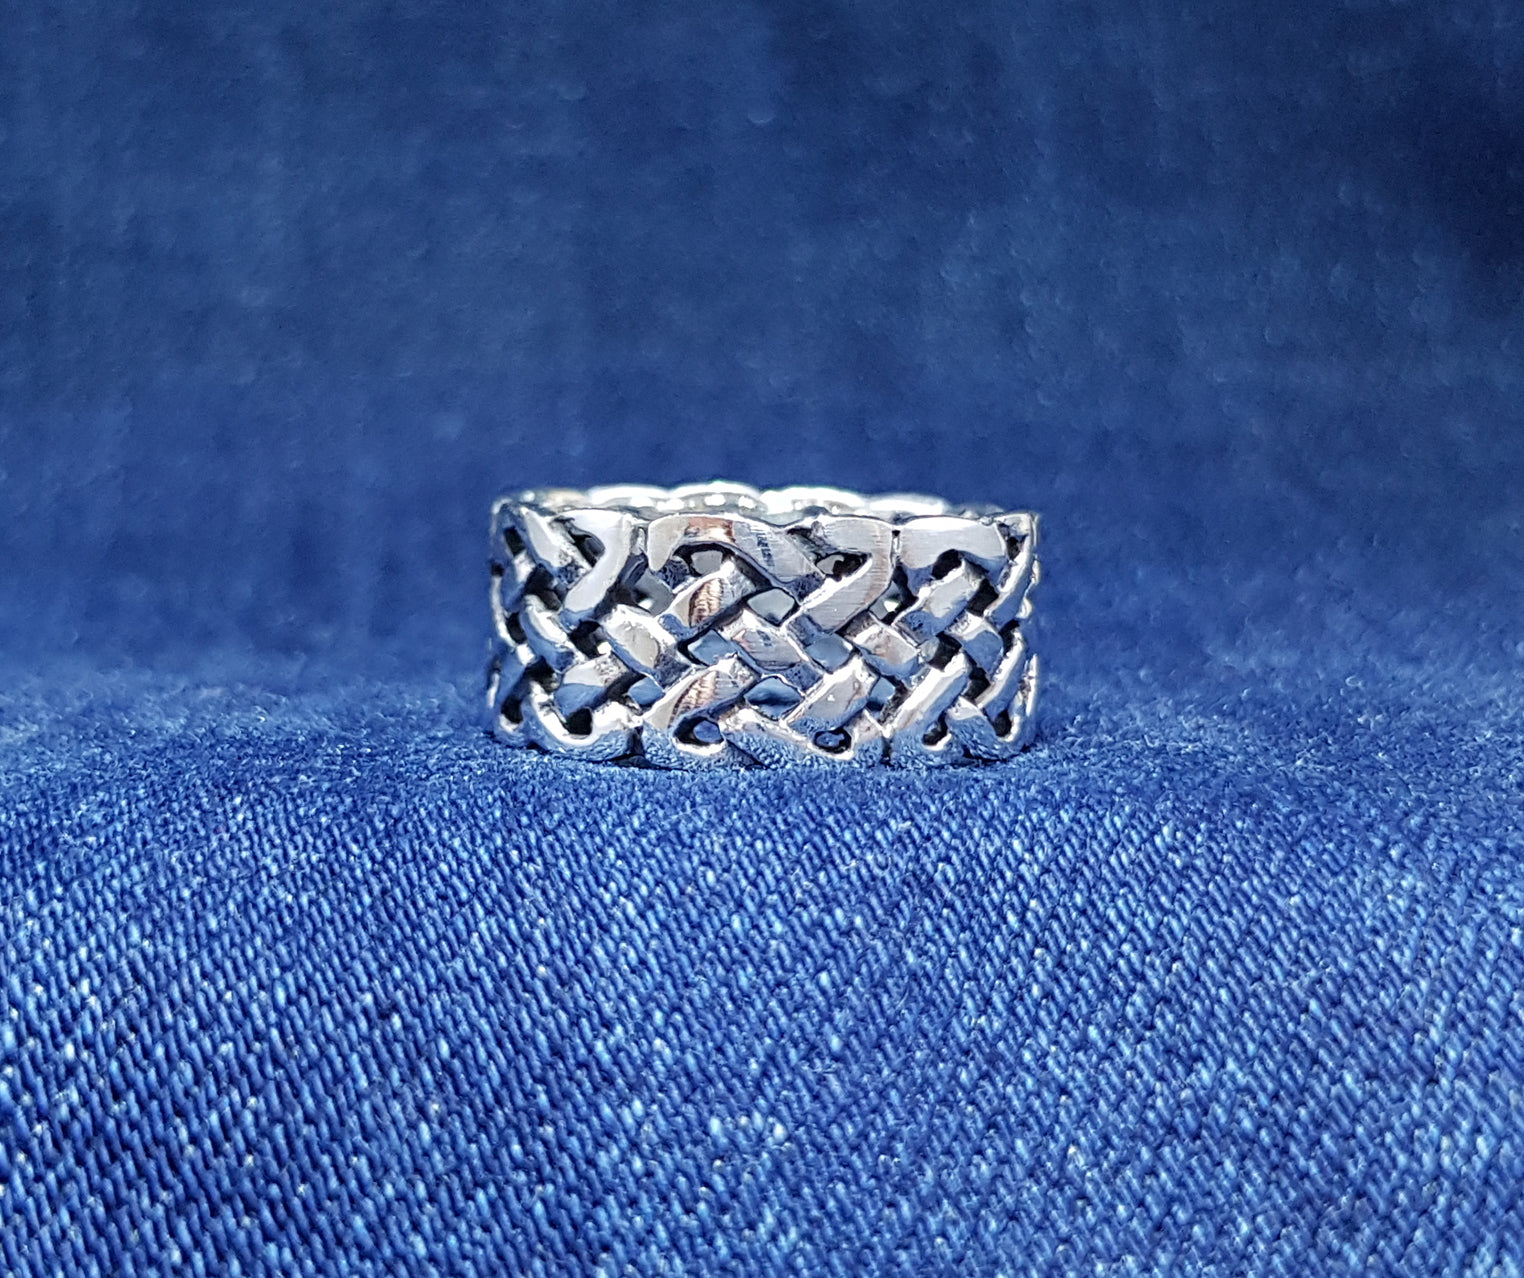 The ring features an openwork design with intertwining Celtic knots and delicate detailing.